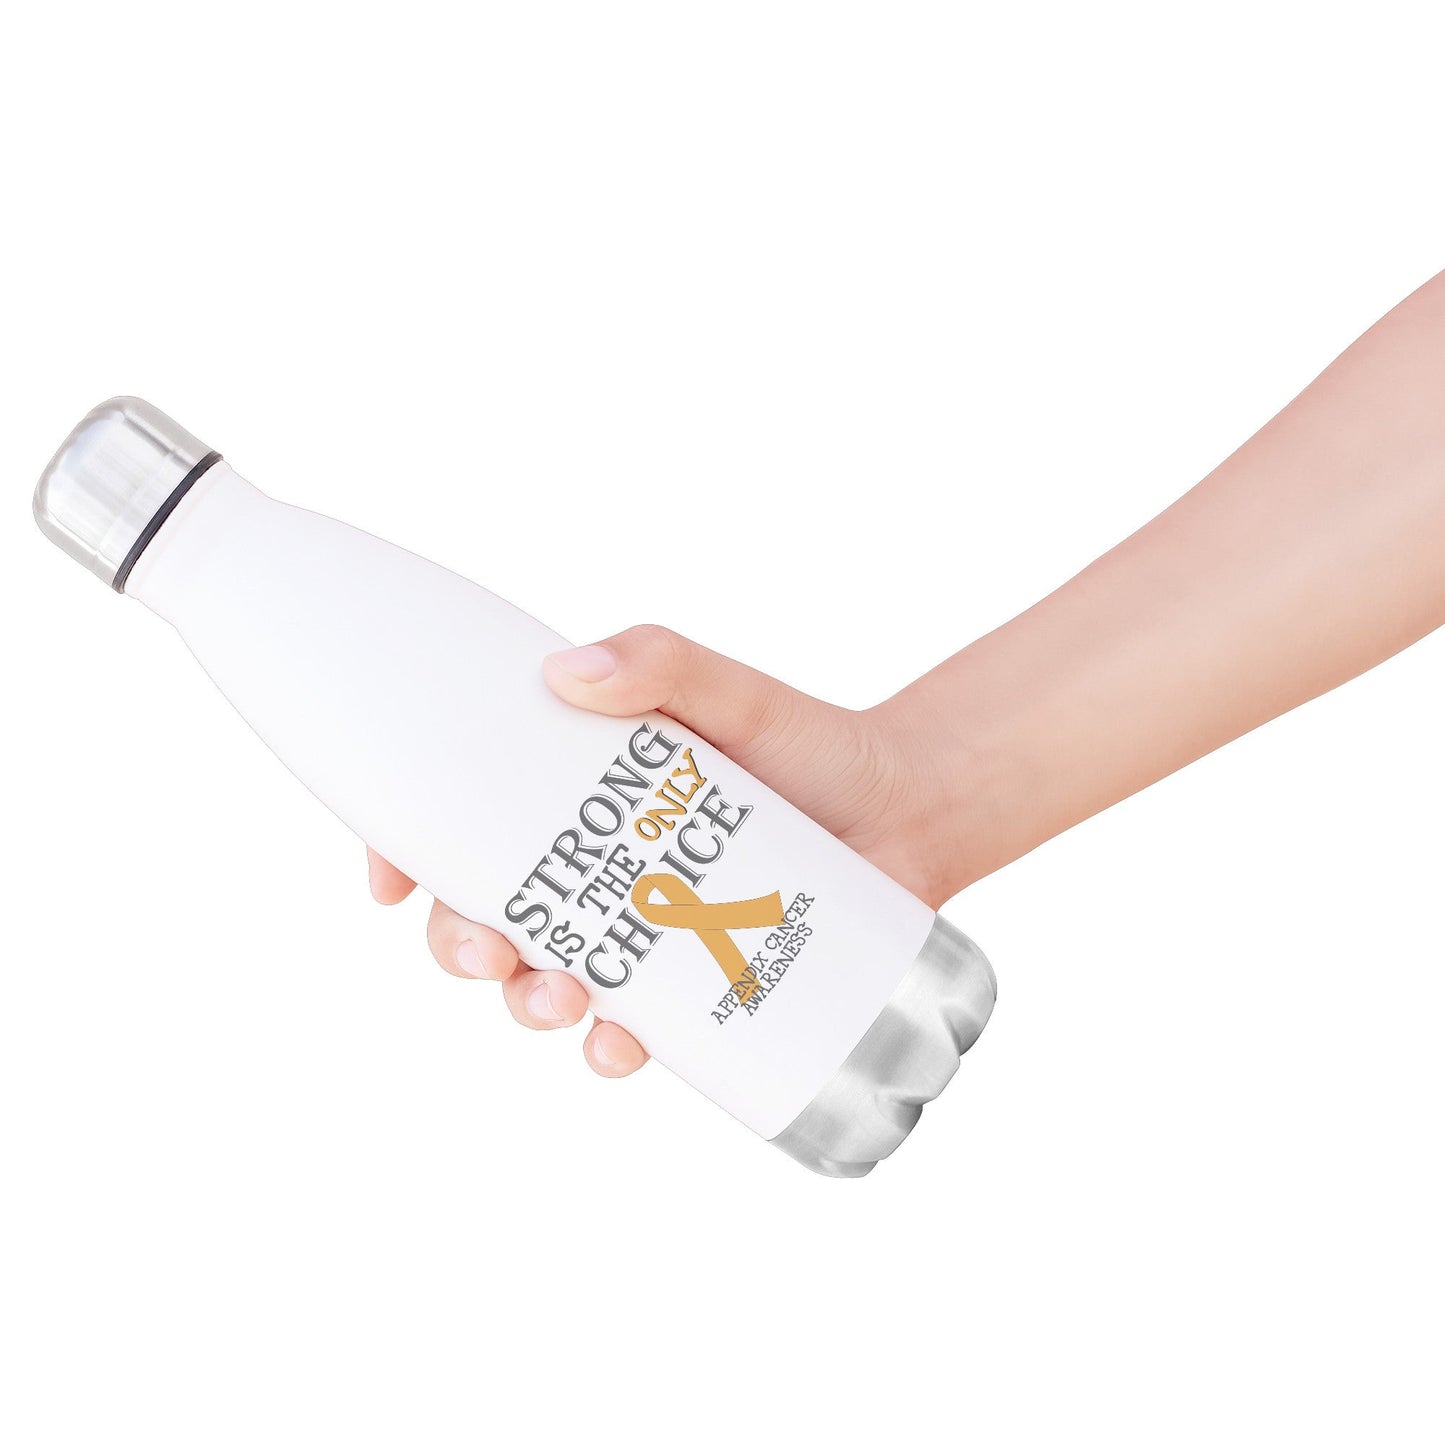 Strong is the Only Choice -Appendix Cancer Awareness 20oz Insulated Water Bottle |x|